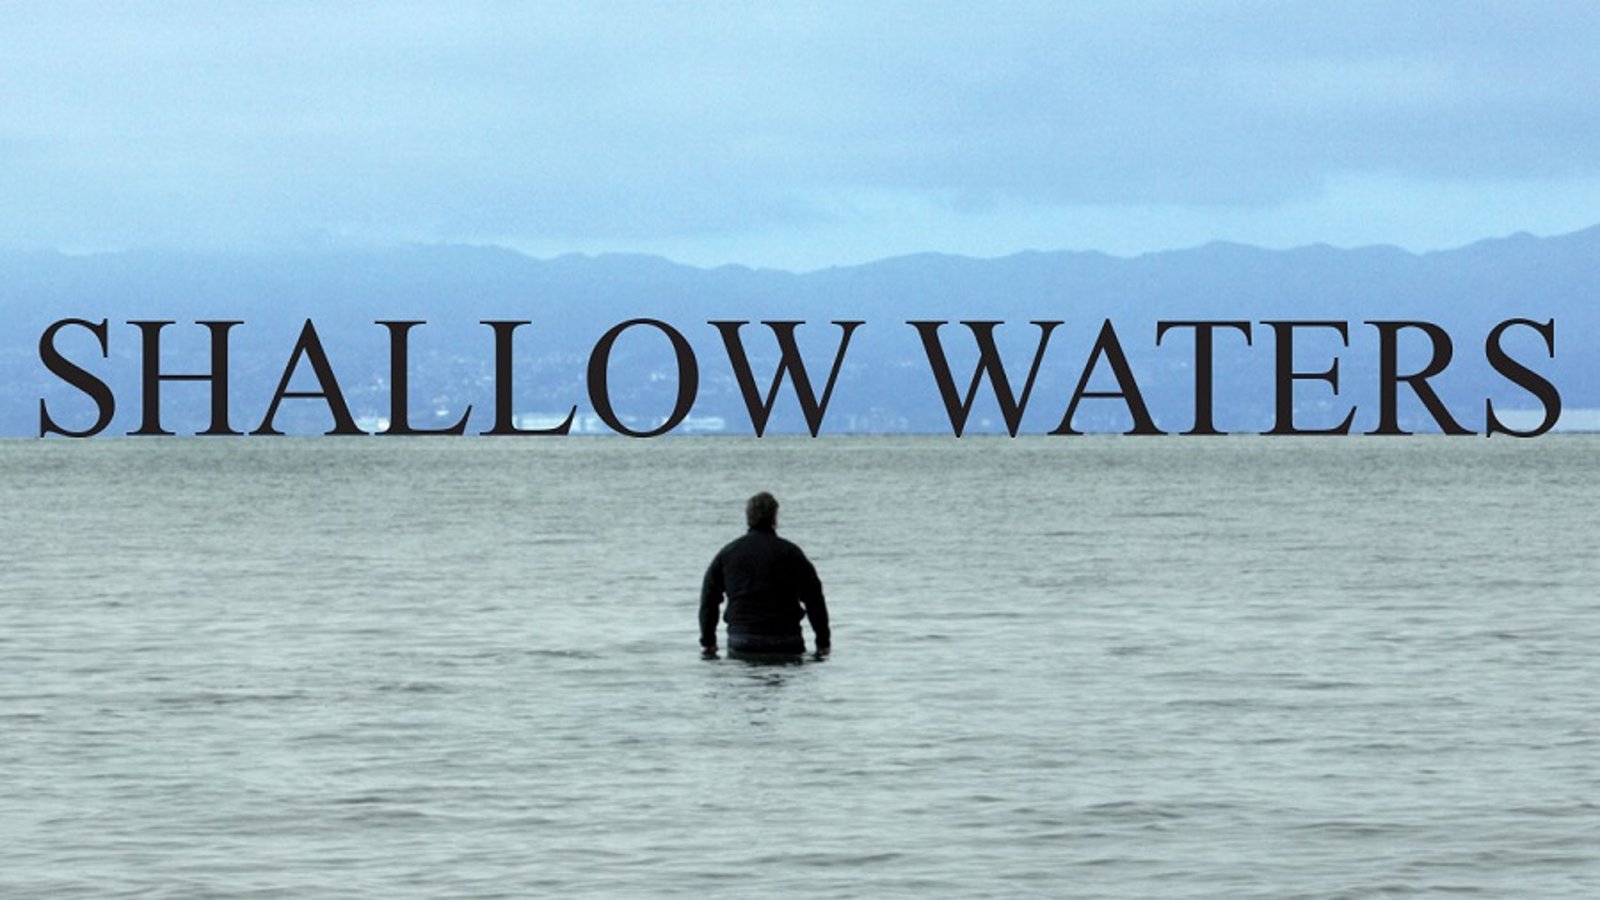 Shallow Waters - The Public Death of Raymond Zack